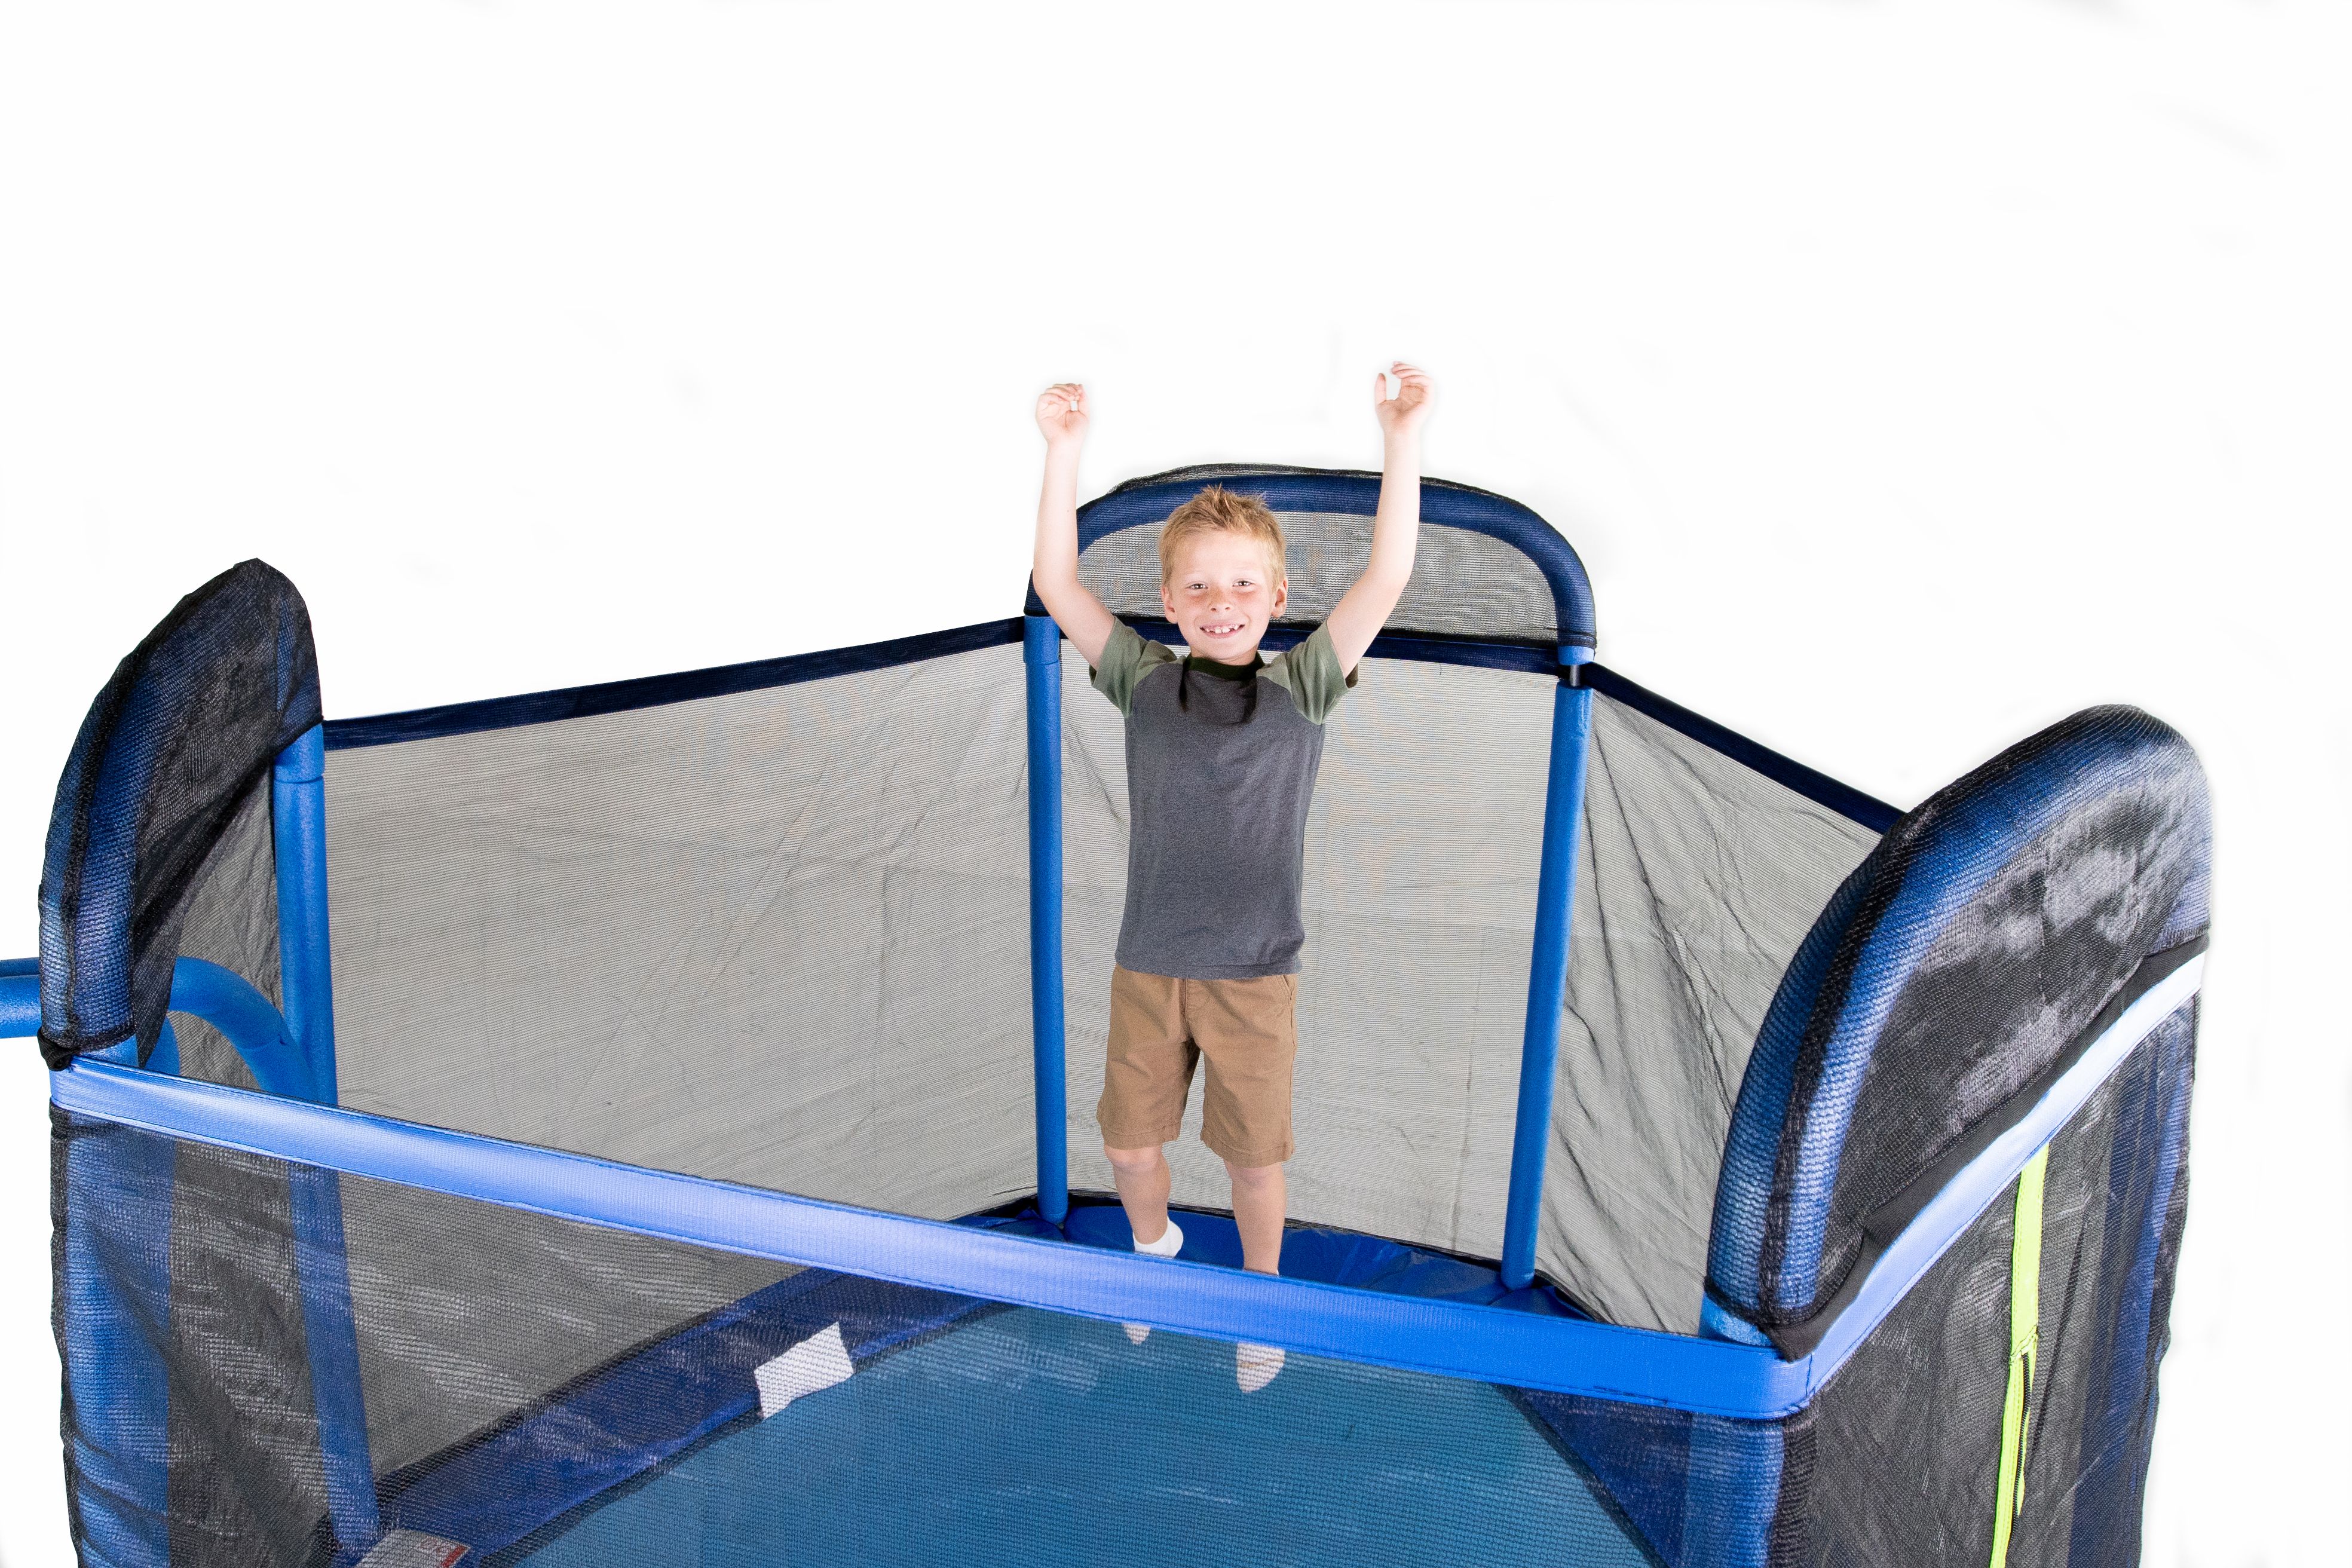 Bounce Pro My First Jump 7' Trampoline and Swing, Blue/Green - image 6 of 14